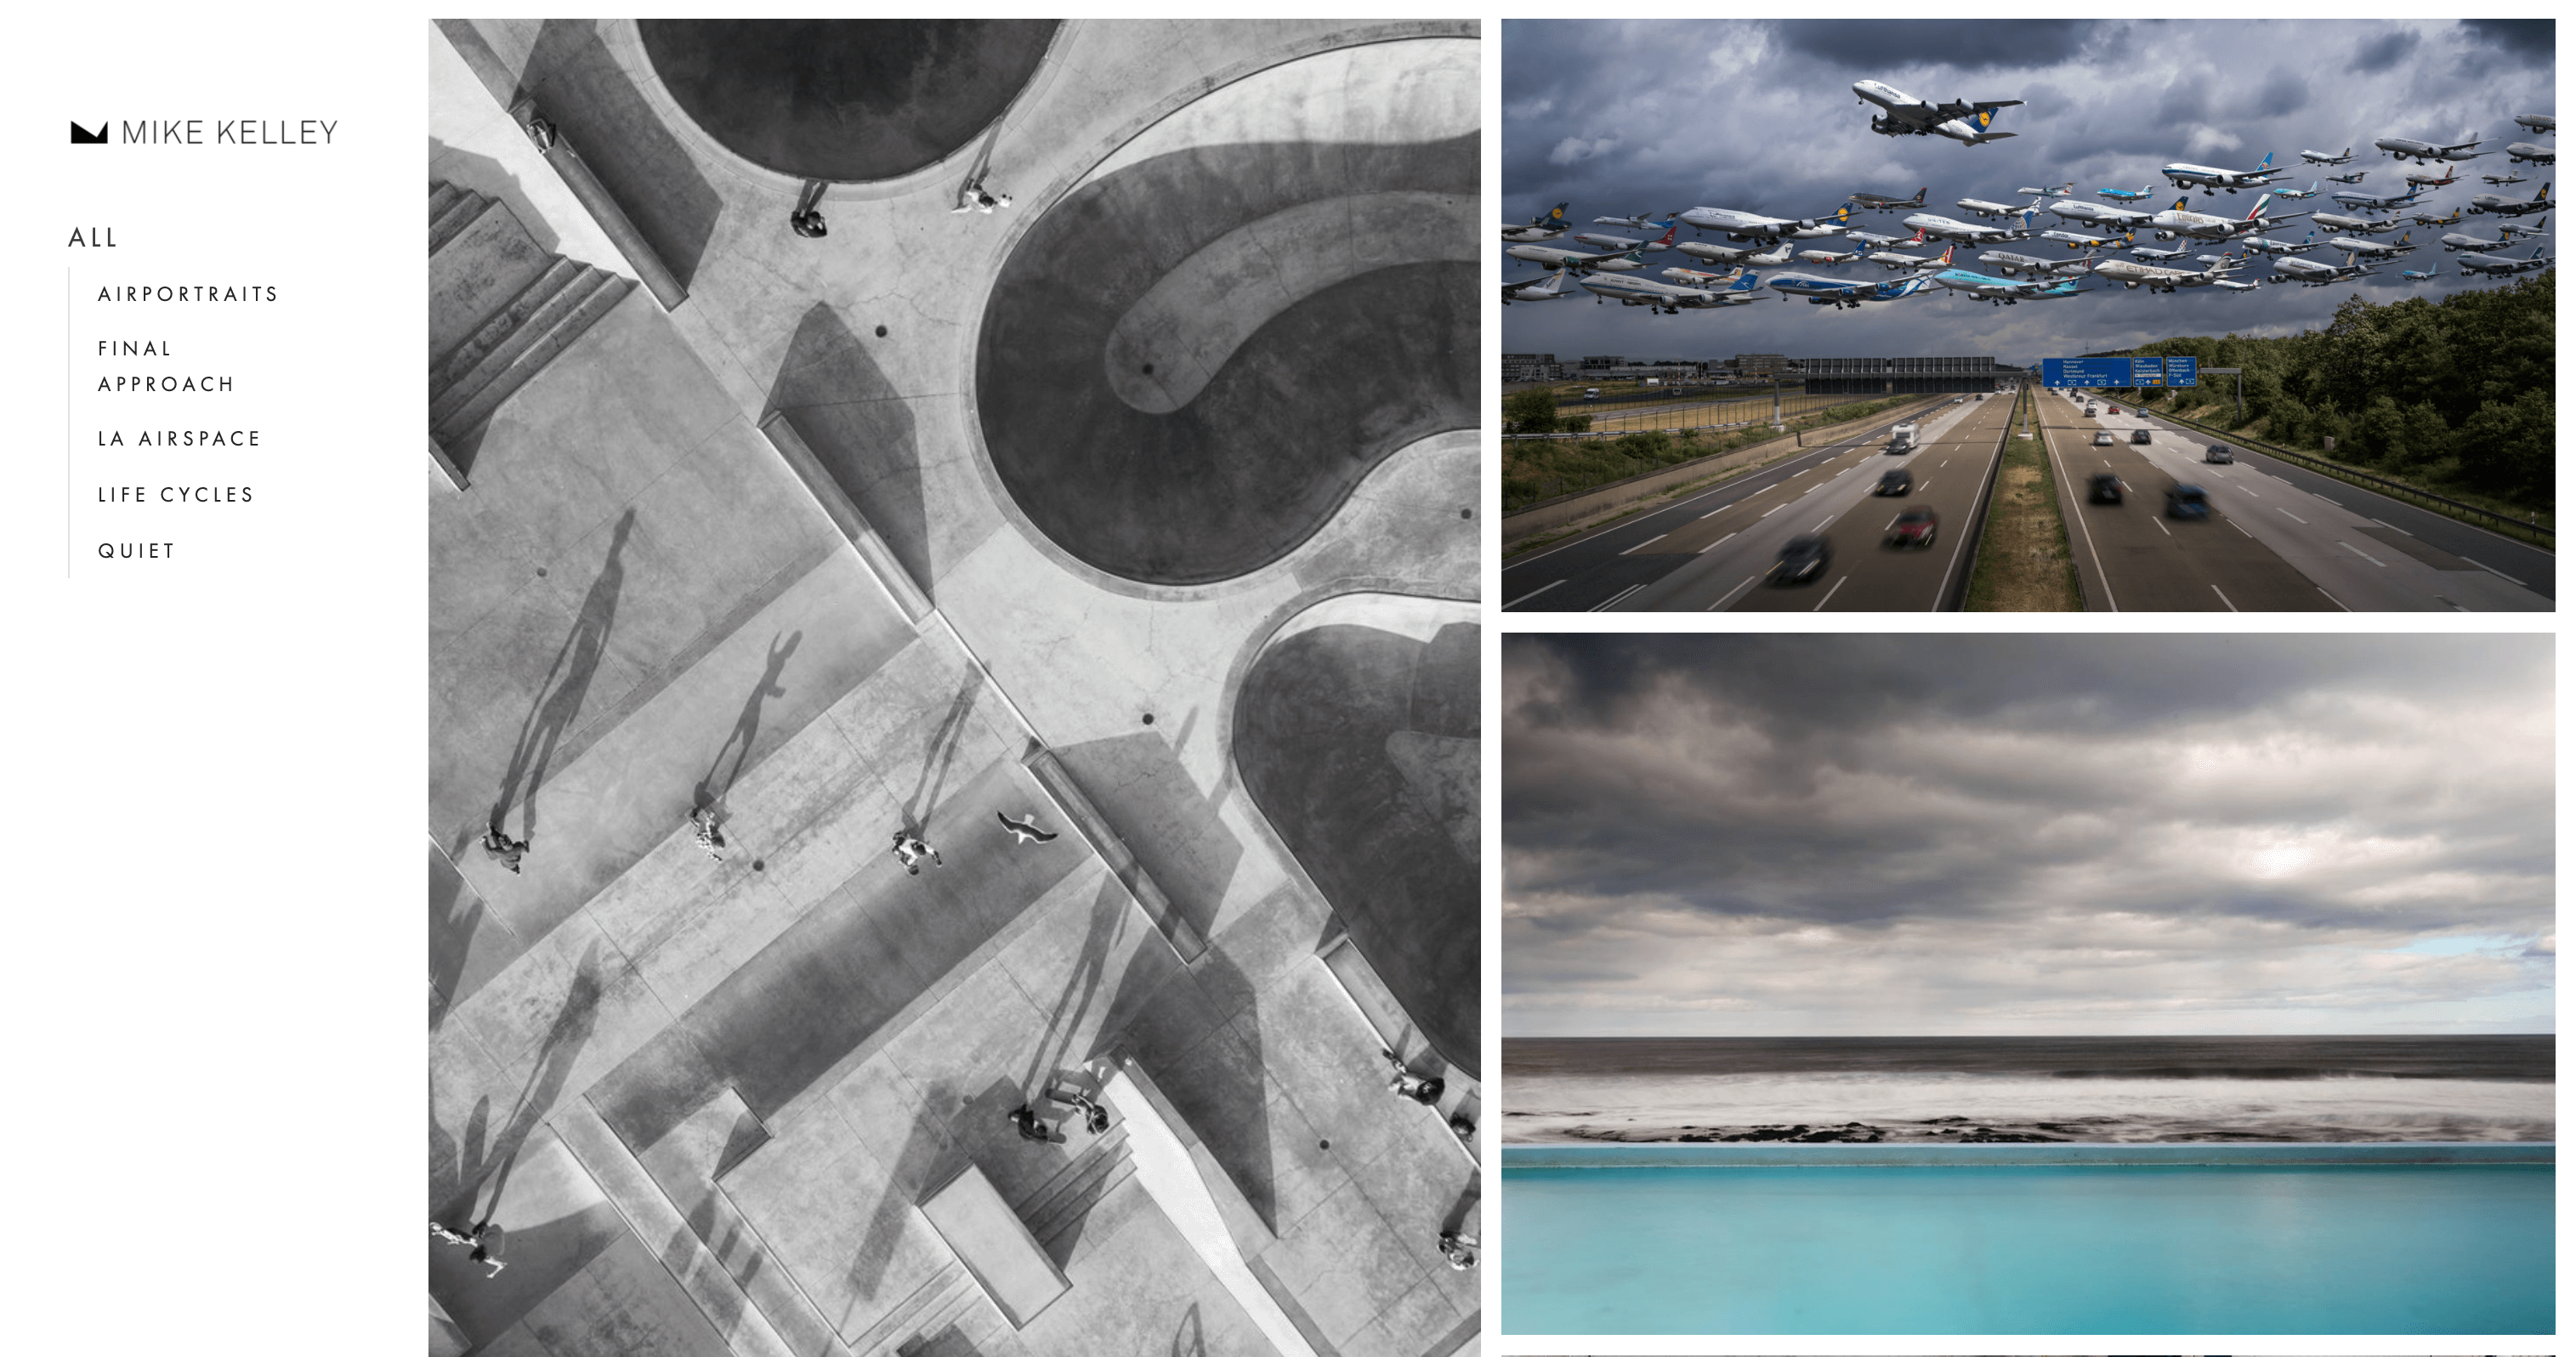 Mike Kelley's photo print shop. His photos are primarily aviation-themed. 